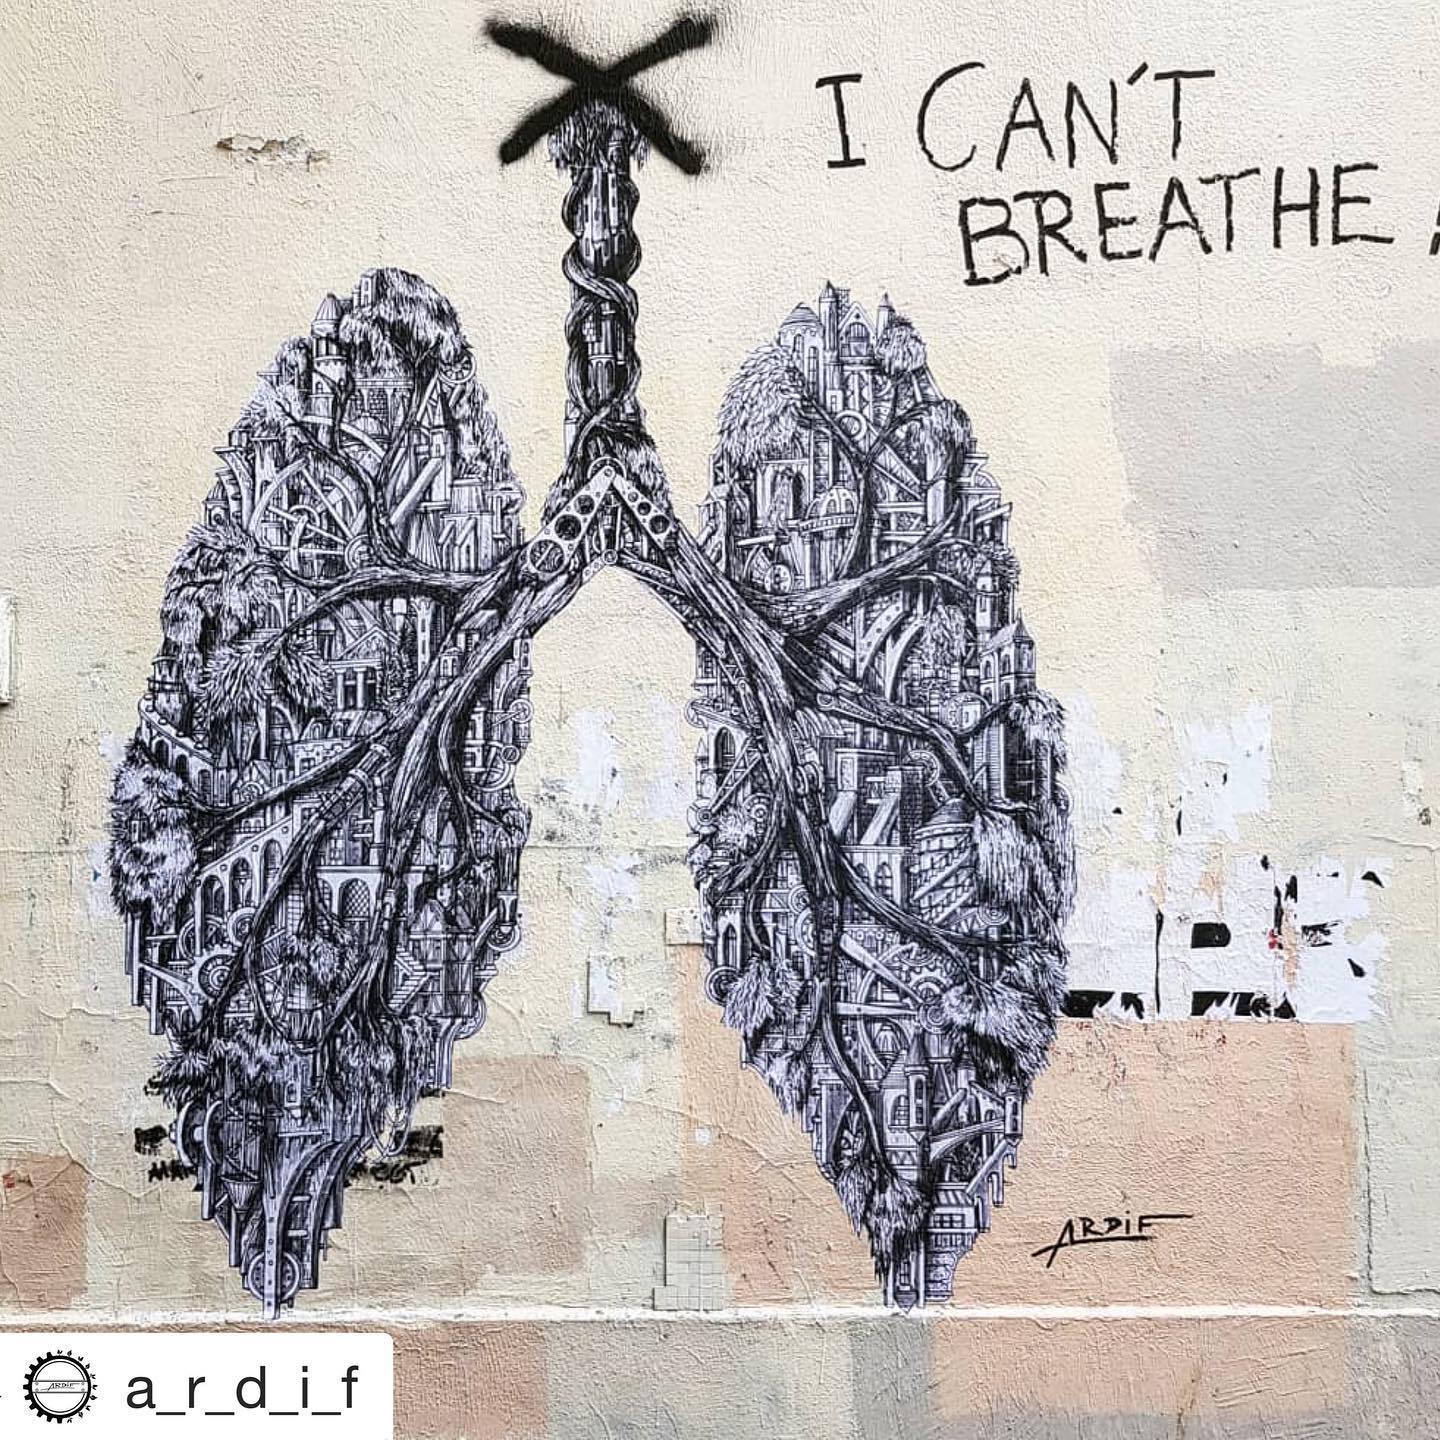 @a_r_d_i_f repost
・・・
"I can't breathe !" Says the Australians during the bushfires and the Californians during the fires. The planet is choking and burning.
.
"I can't breathe !" Says the covid patient in their hospital room
.
"I can't breathe !" Says George Floyd to the cop who murdered him and to the people of the world. .
.
.
.
2020 is an unbreathable year. We need respect, we need equality, we need peace, we need air.....
.
.